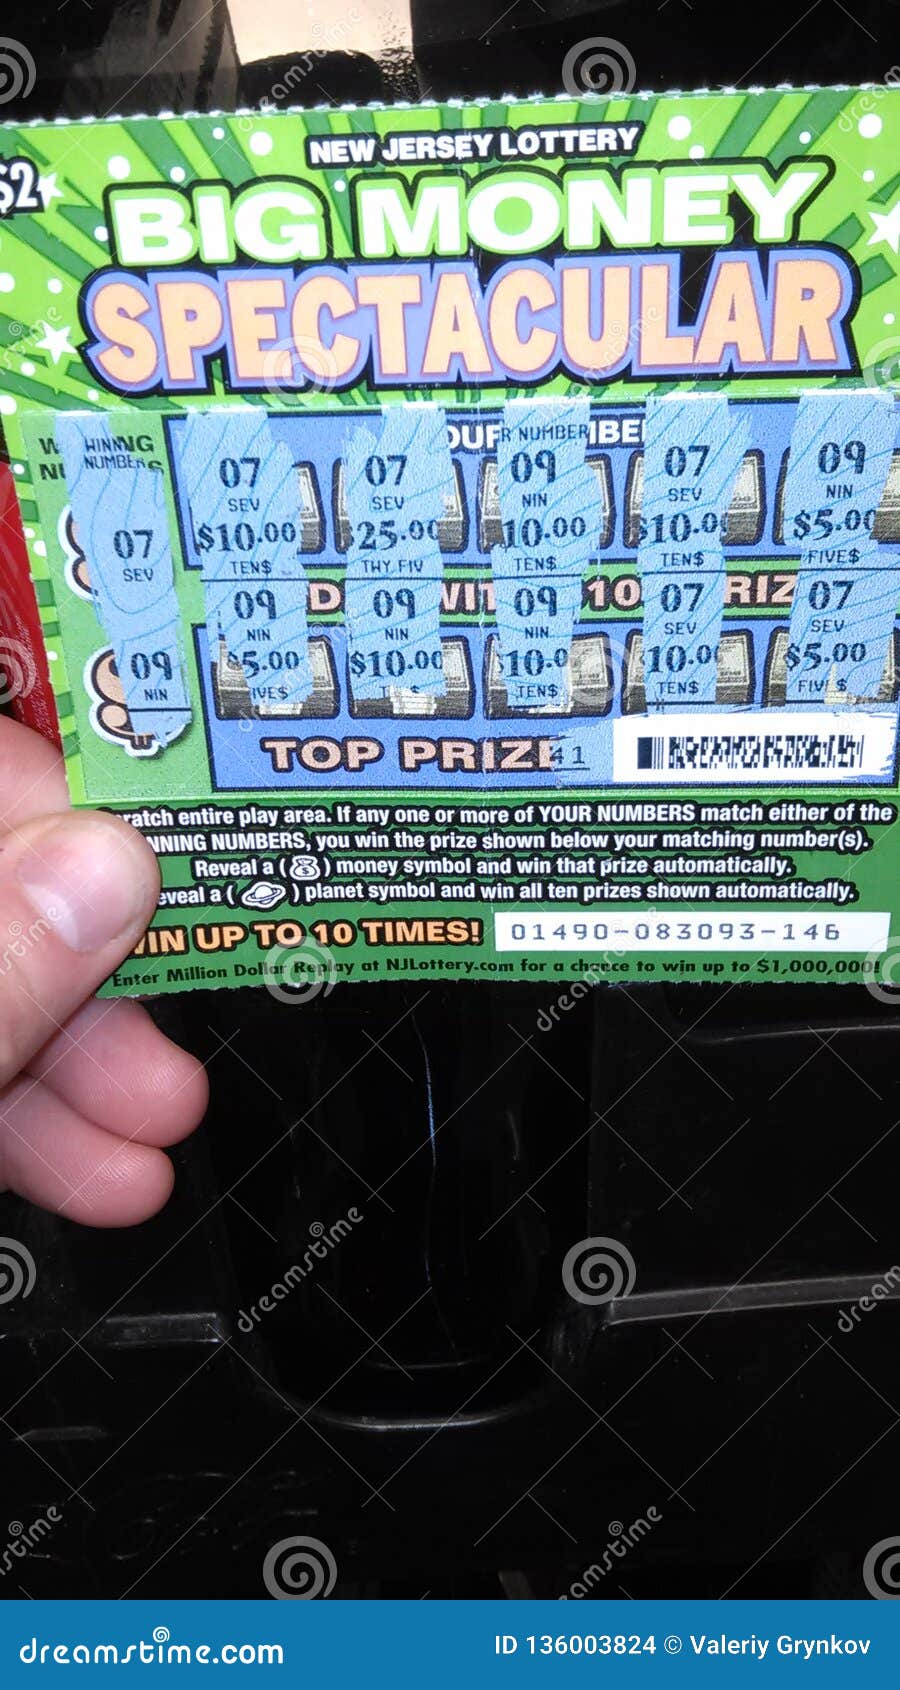 $2,500 Losing New Jersey Lottery Scratch Off Tickets 2019 